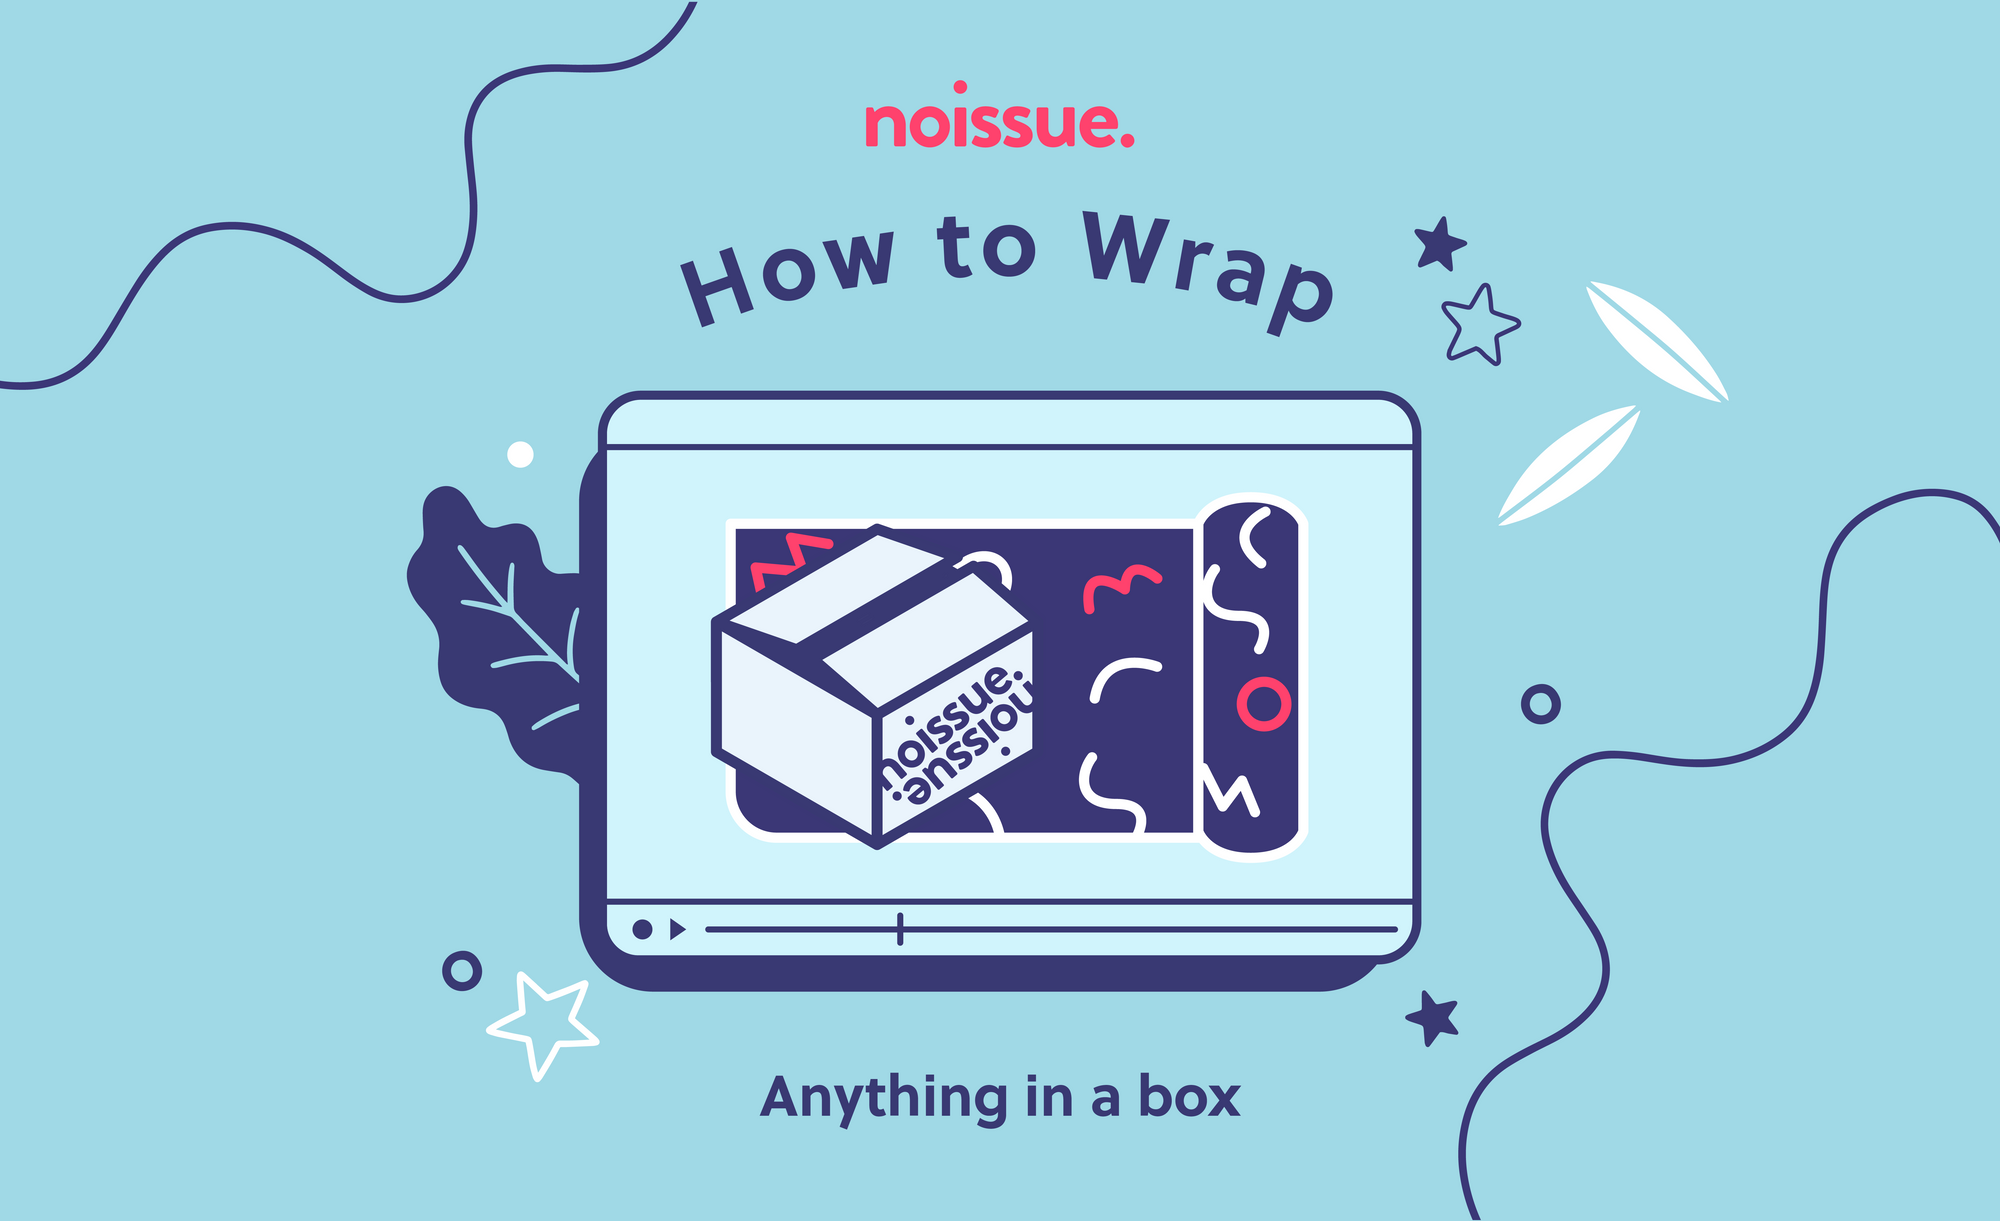 How to Wrap: a Candle (or Anything!) in a Box